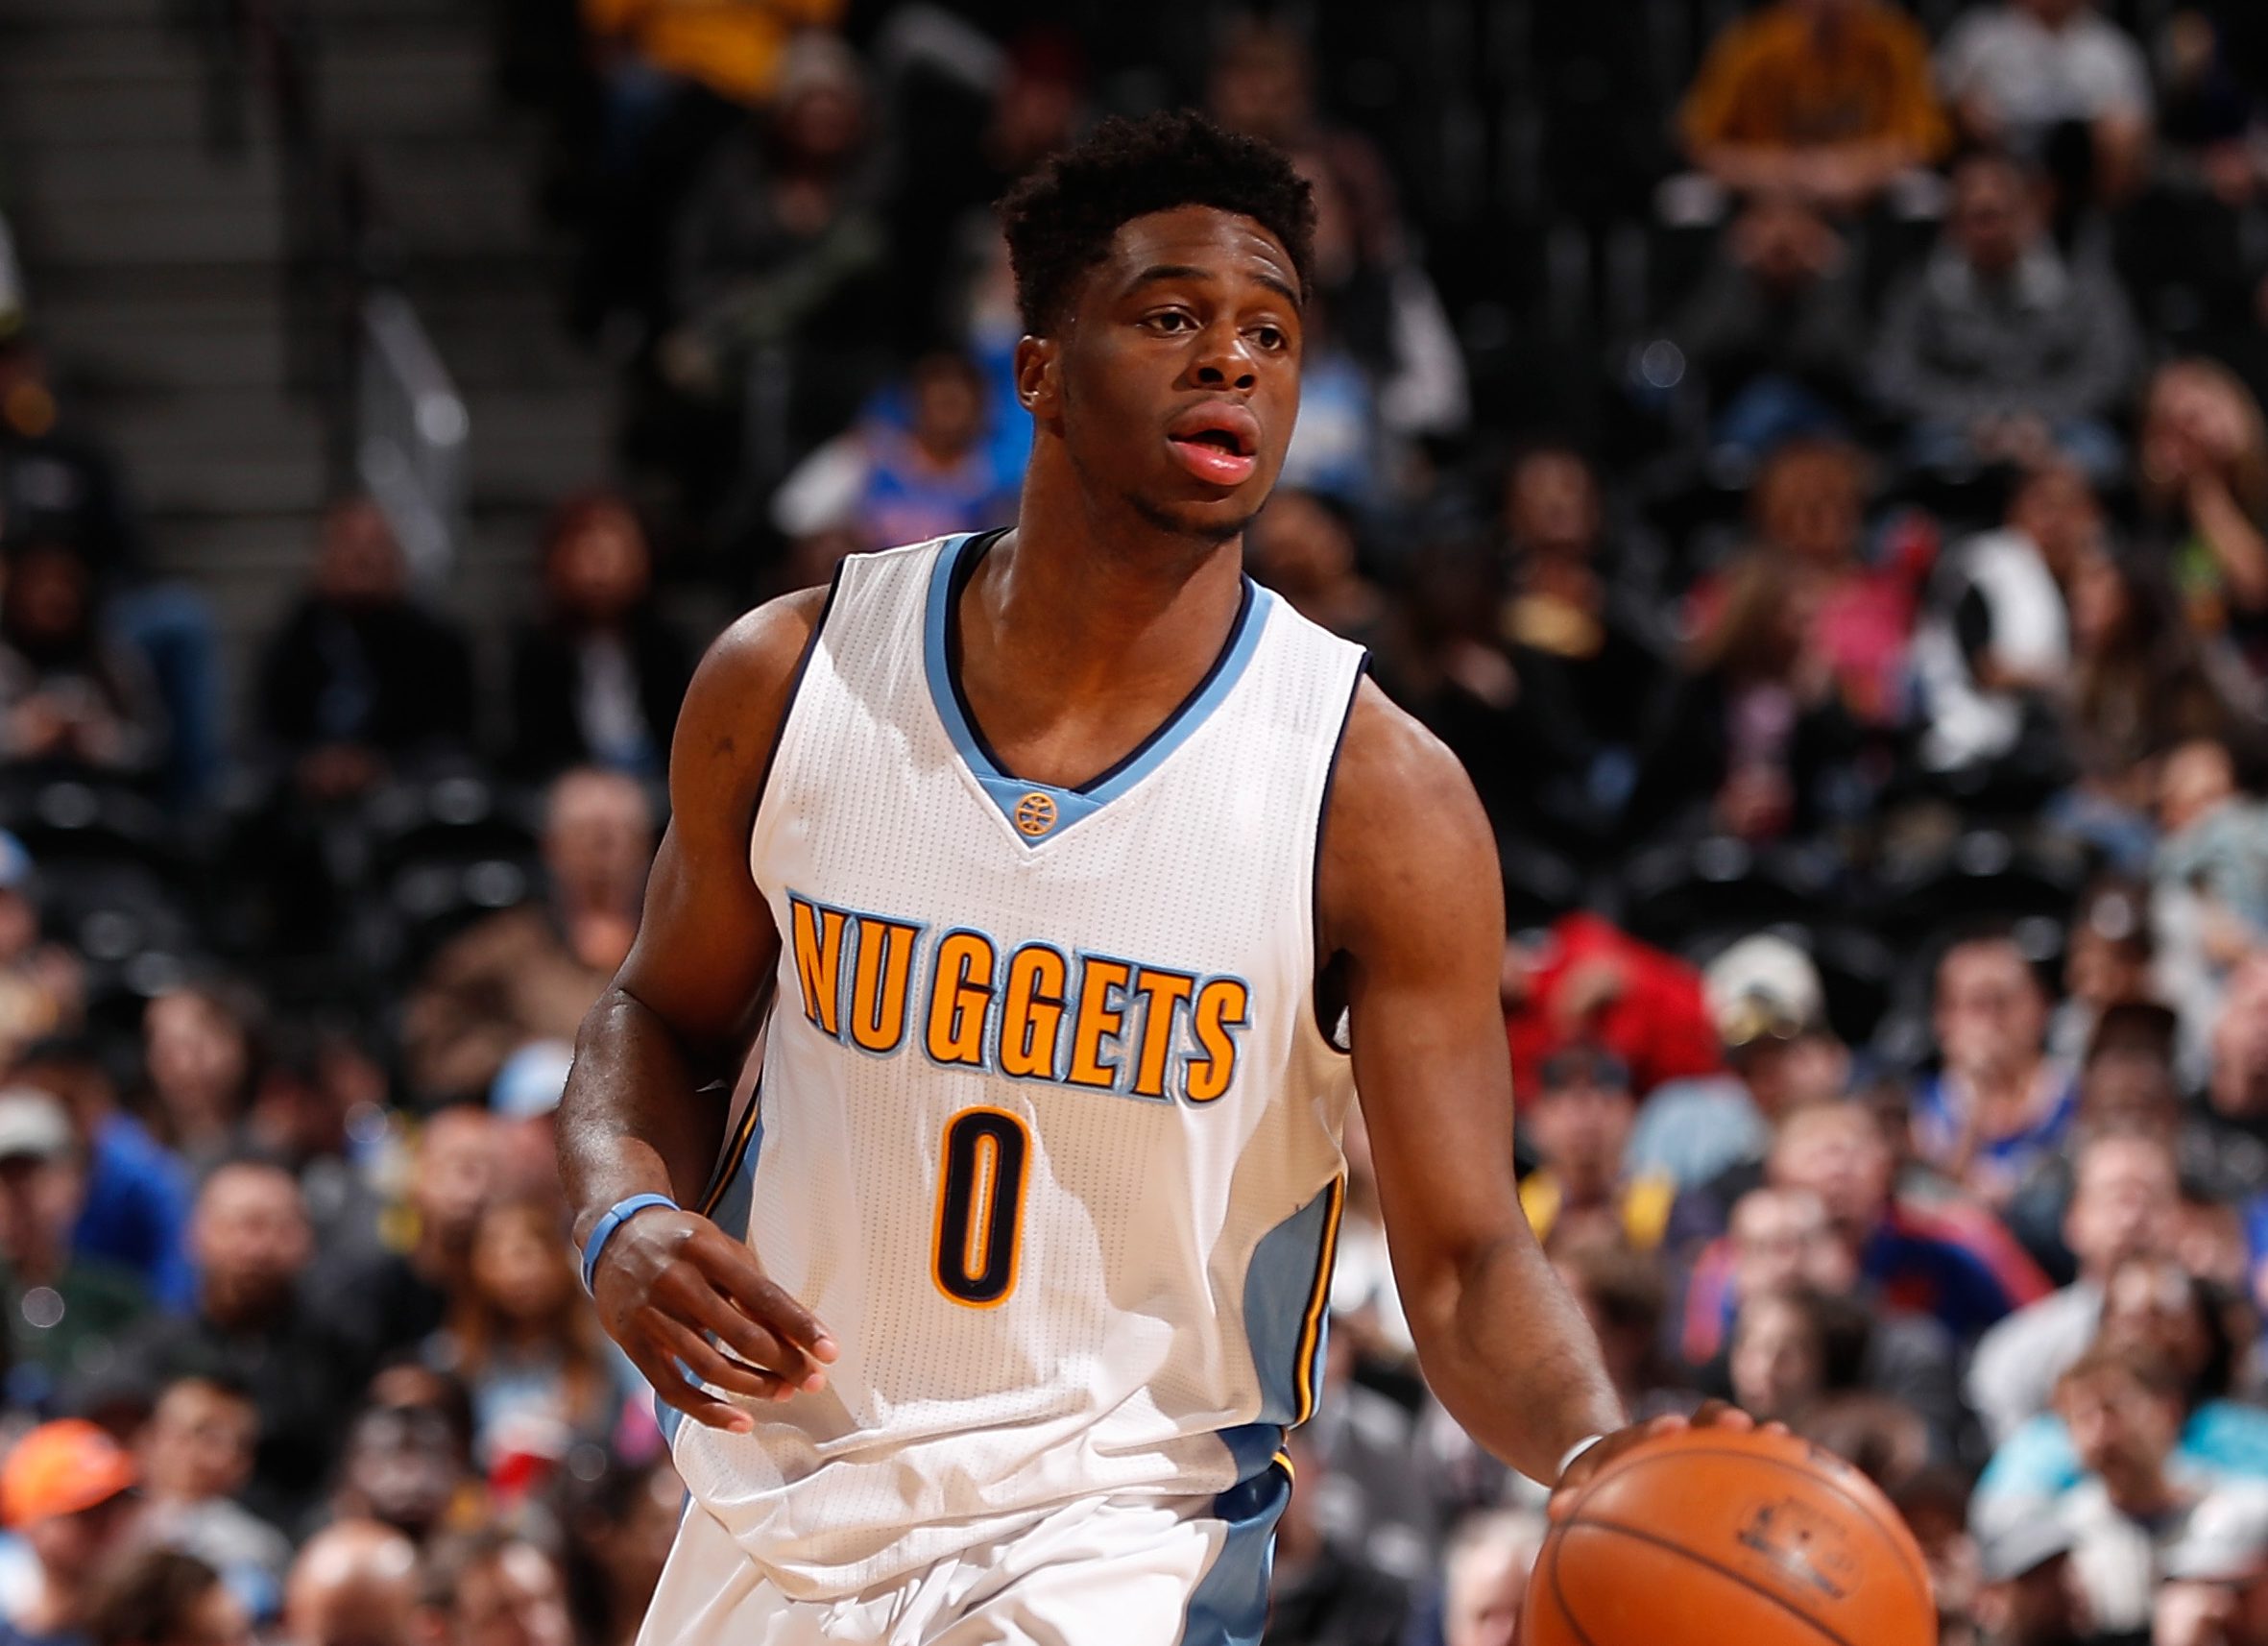 Nuggets vs. Grizzlies Live Stream How to Watch Online